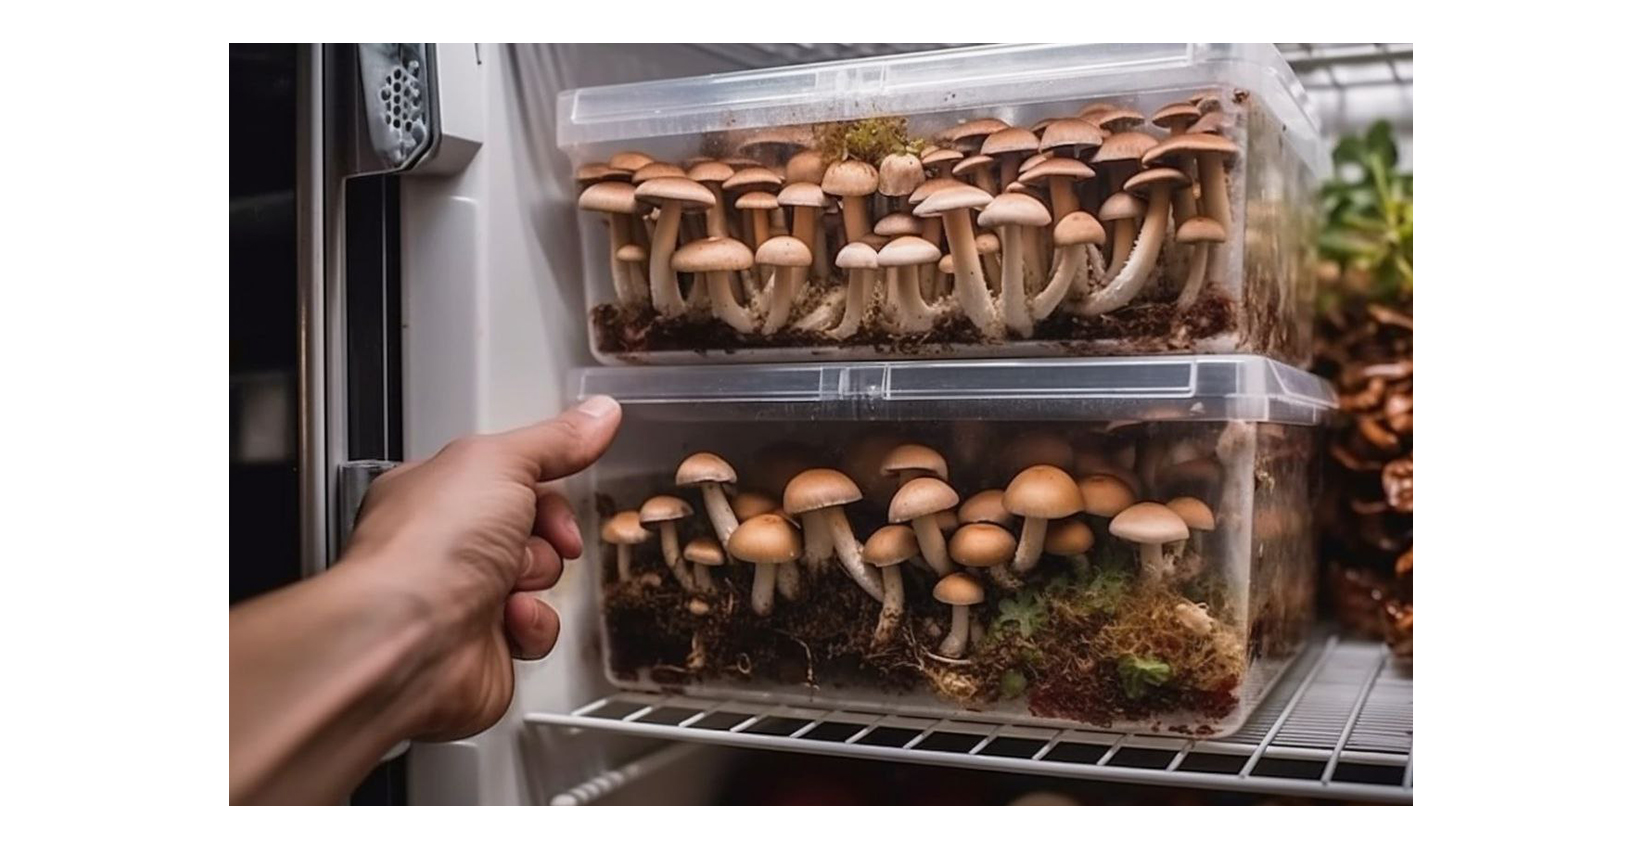 A man taking out magic mushrooms of a refrigerator